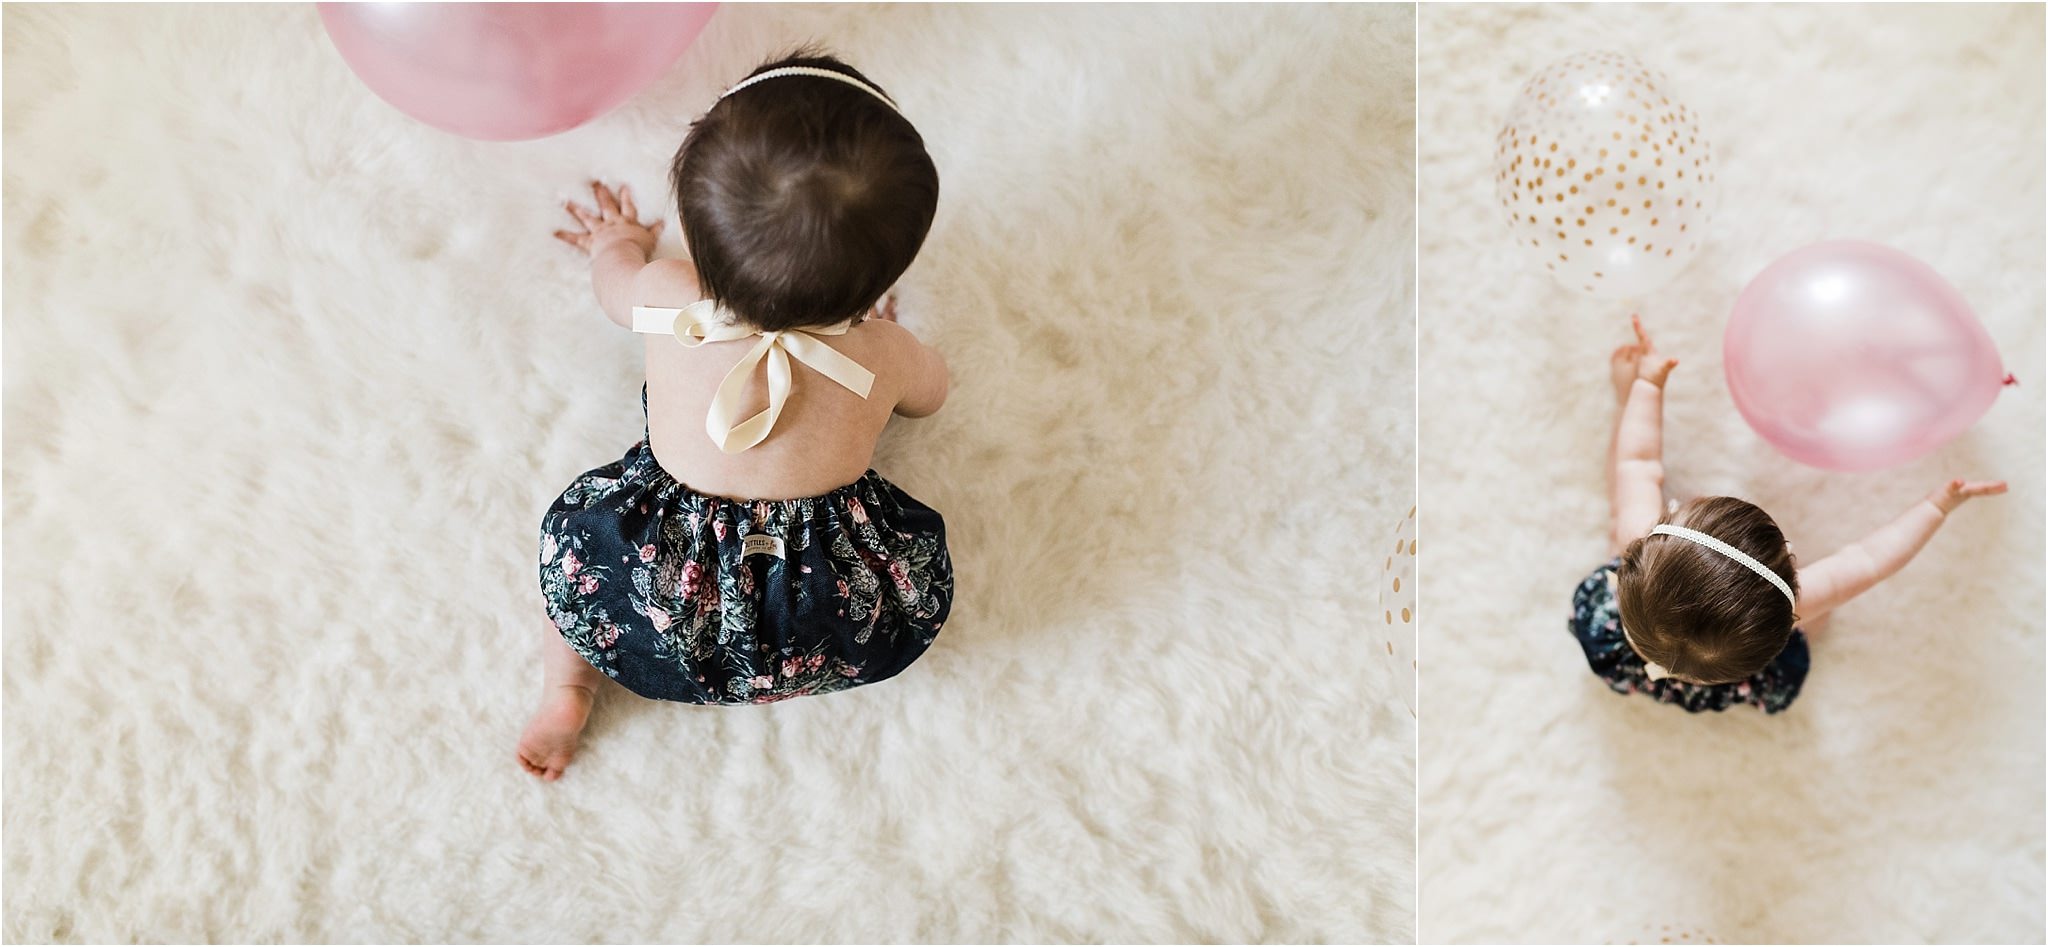 ONE YEAR OLD GIRL IN FLORAL ROMPER PHOTOS IN NURSERY